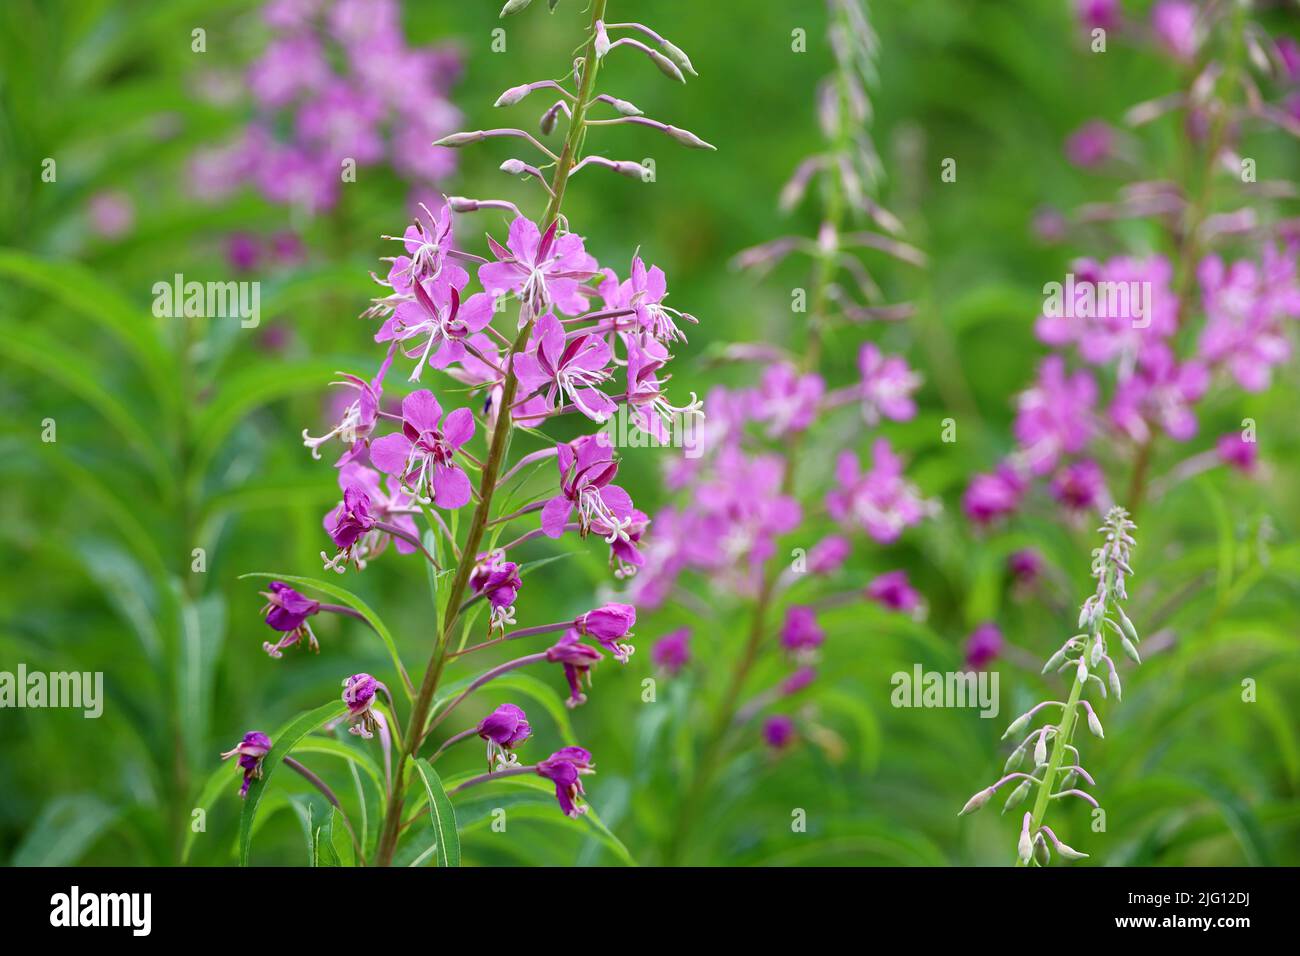 Pink flowers of Willow-herb (Ivan tea, fireweed) in green grass of summer field Stock Photo